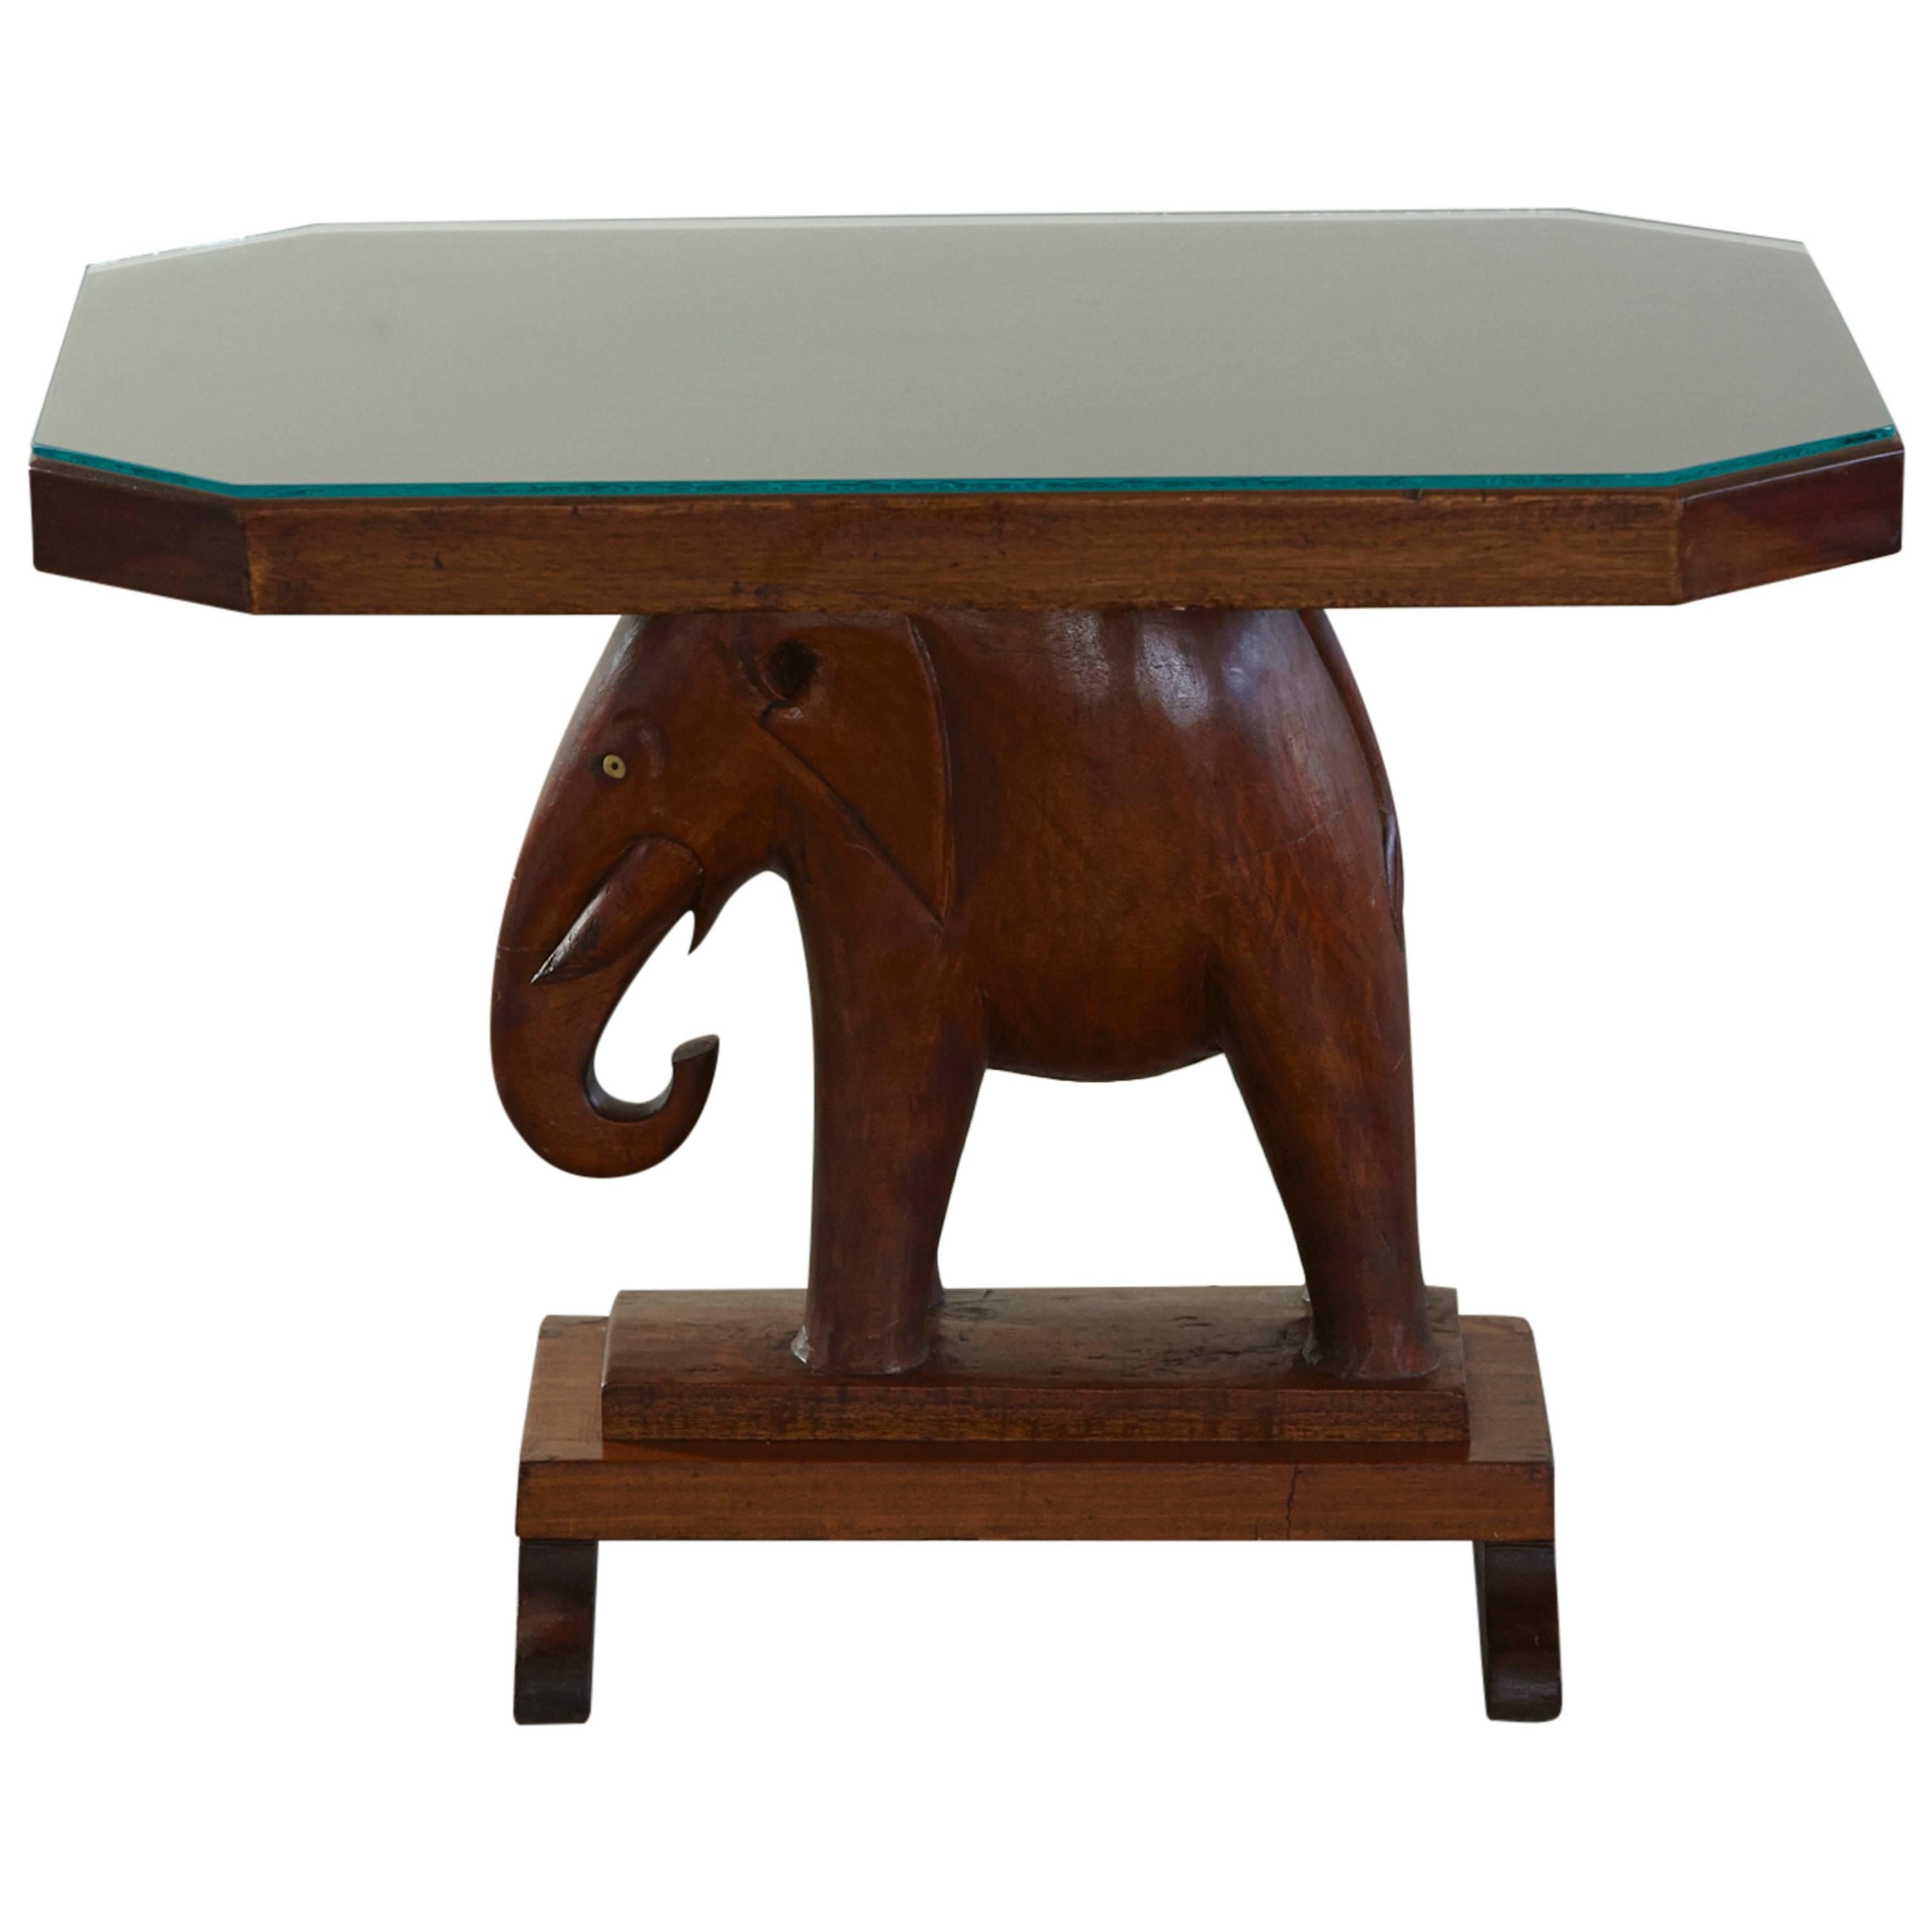 Nigerian Mahogany End Table with Carved Elephant Base, circa 1940s